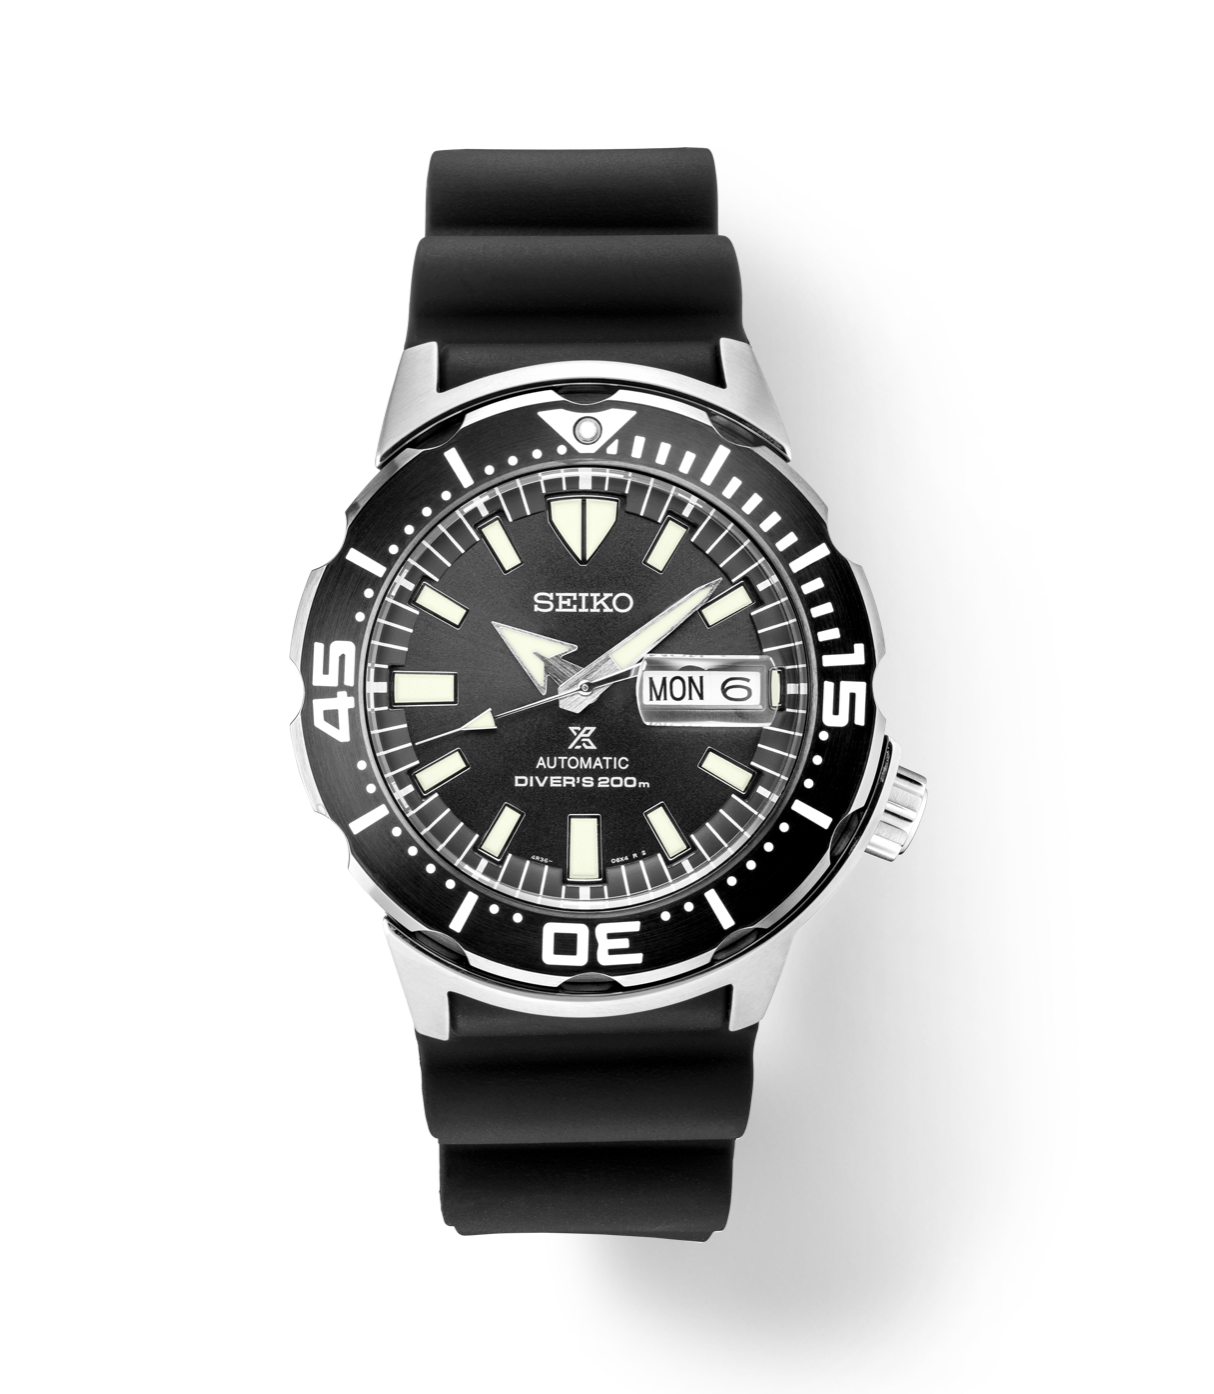 Seiko-SRPD27-Prospex-424-mm-Steel-Black-Dial-Rubber-Diver-Automatic-Mens-Watch-115612032728